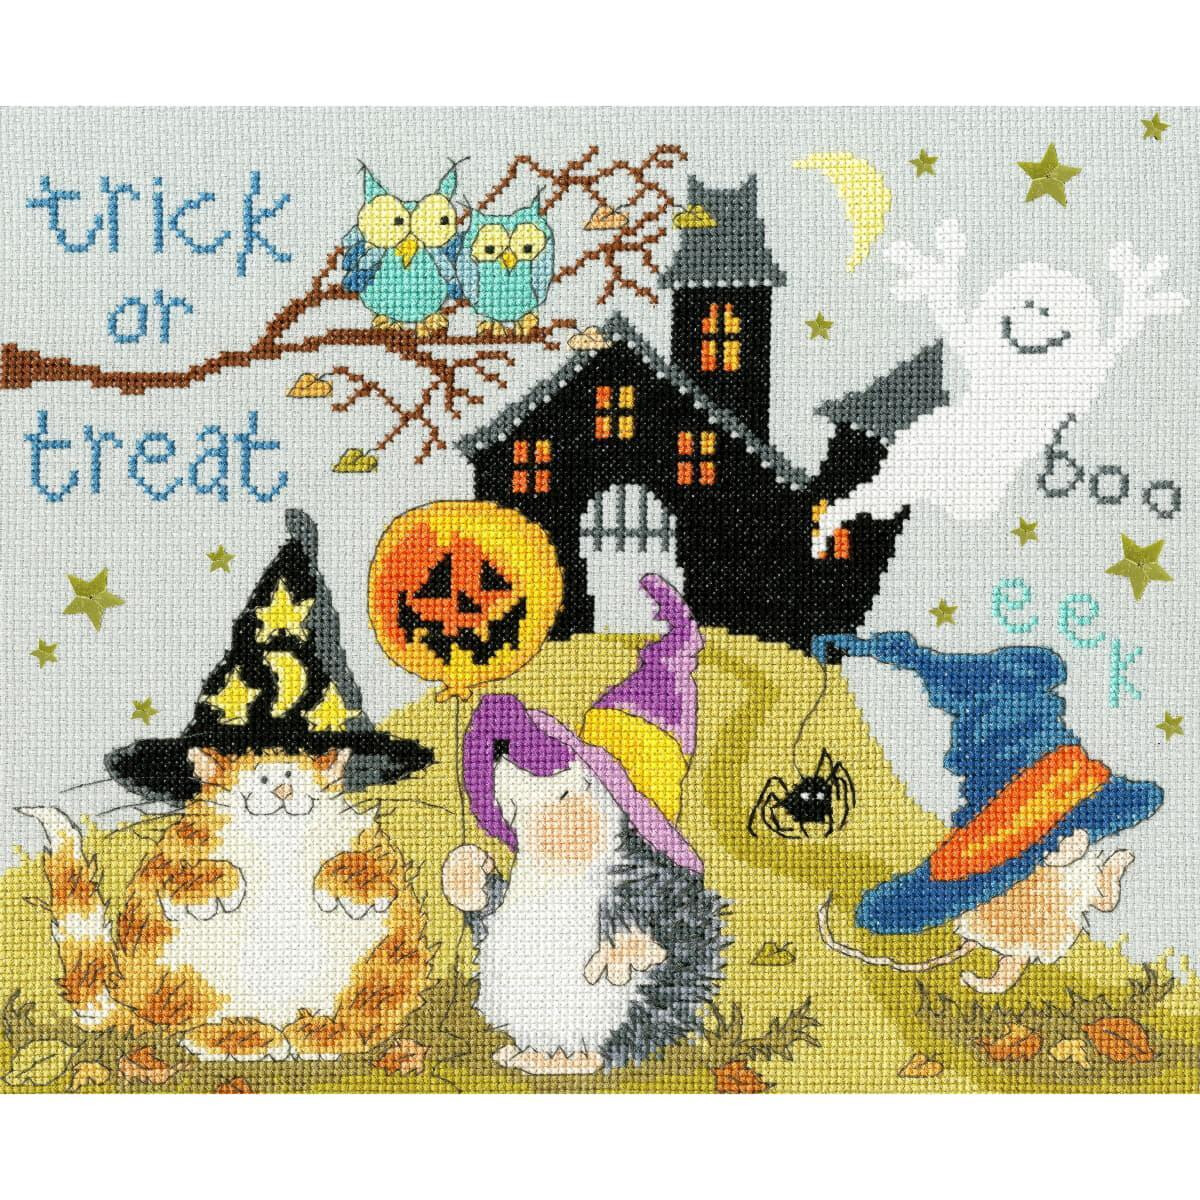 A Halloween-themed embroidery pack design (cross stitch)...